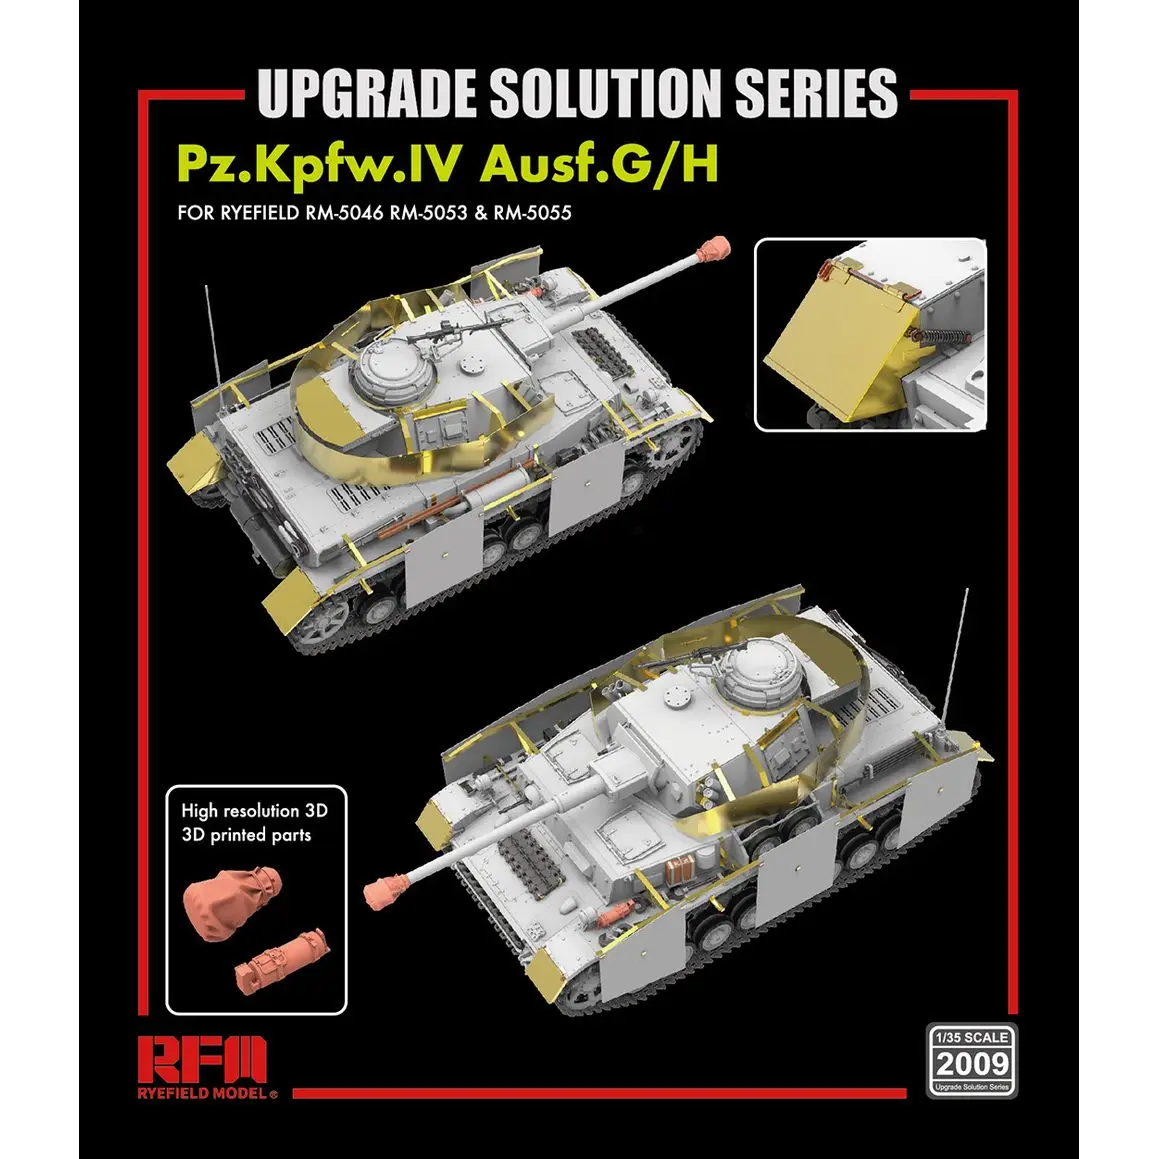 Details about   RYEFIELD MODEL RFM RM-2009 1/35 Upgrade Set for Pz.Kpfw.IV Ausf.G/H 